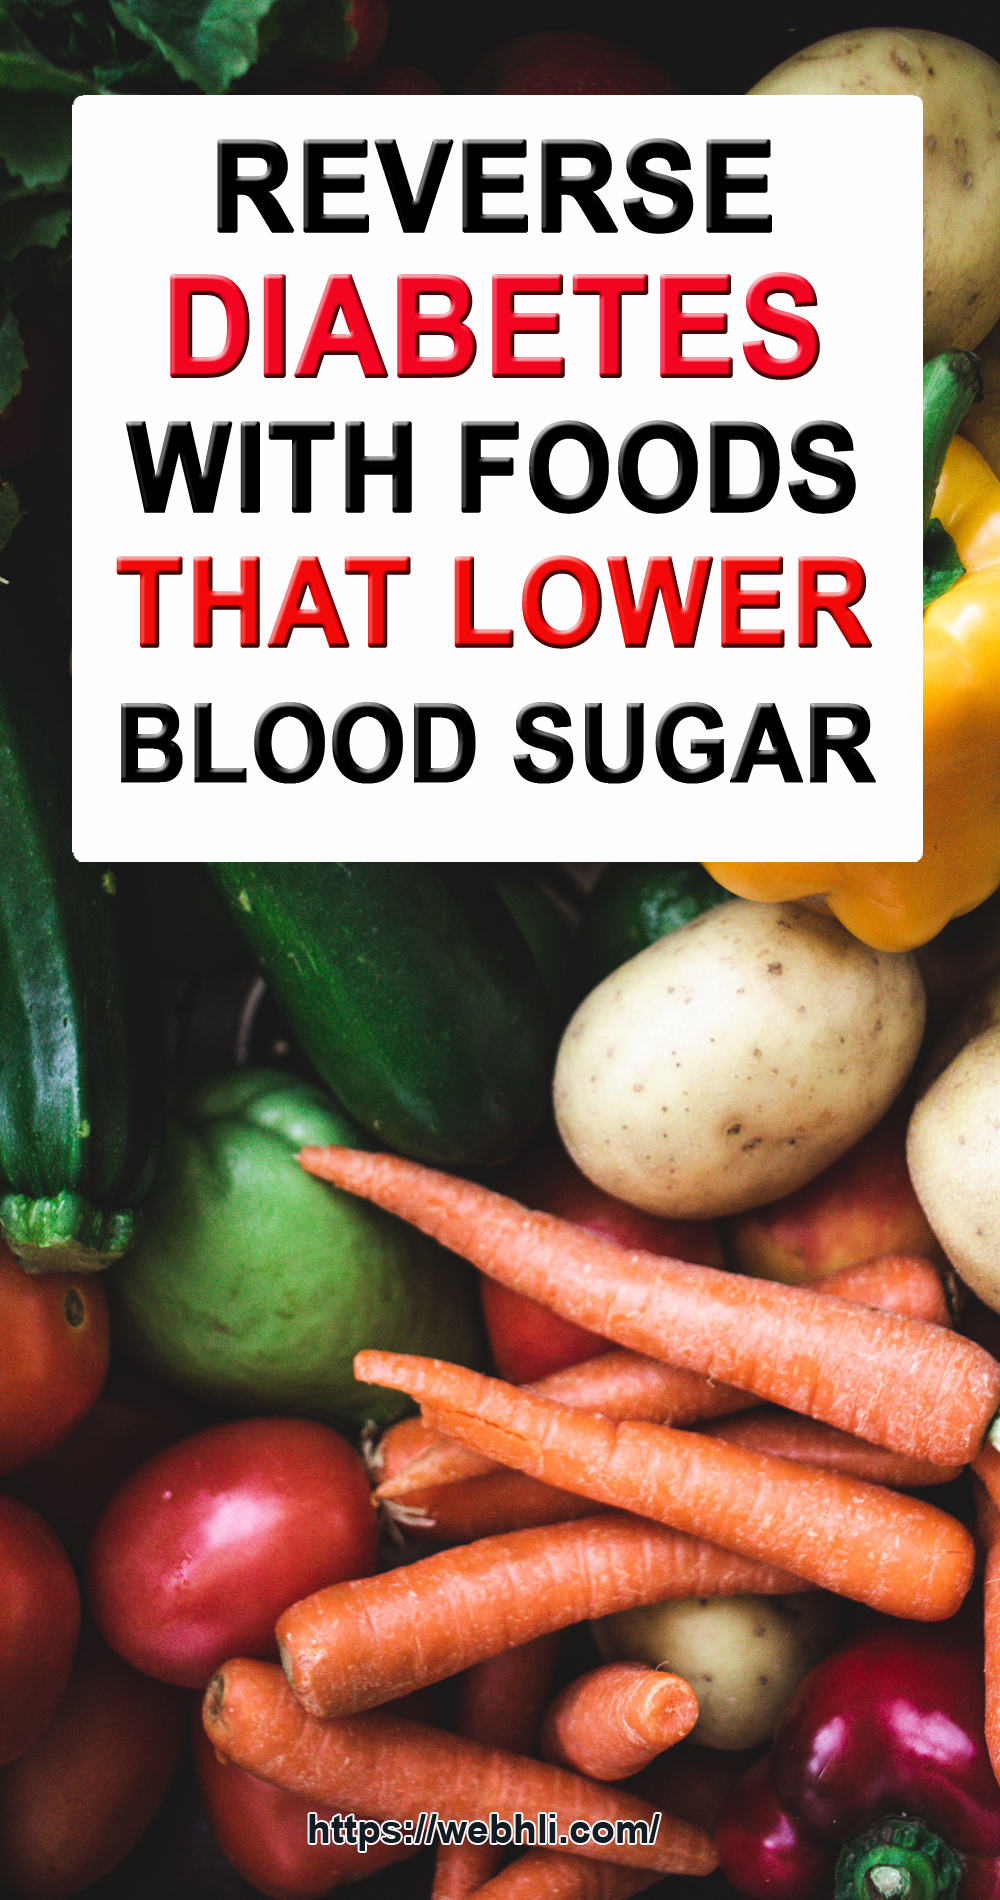 Reverse Diabetes With Foods That Lower Blood Sugar | Healthy Lifestyle